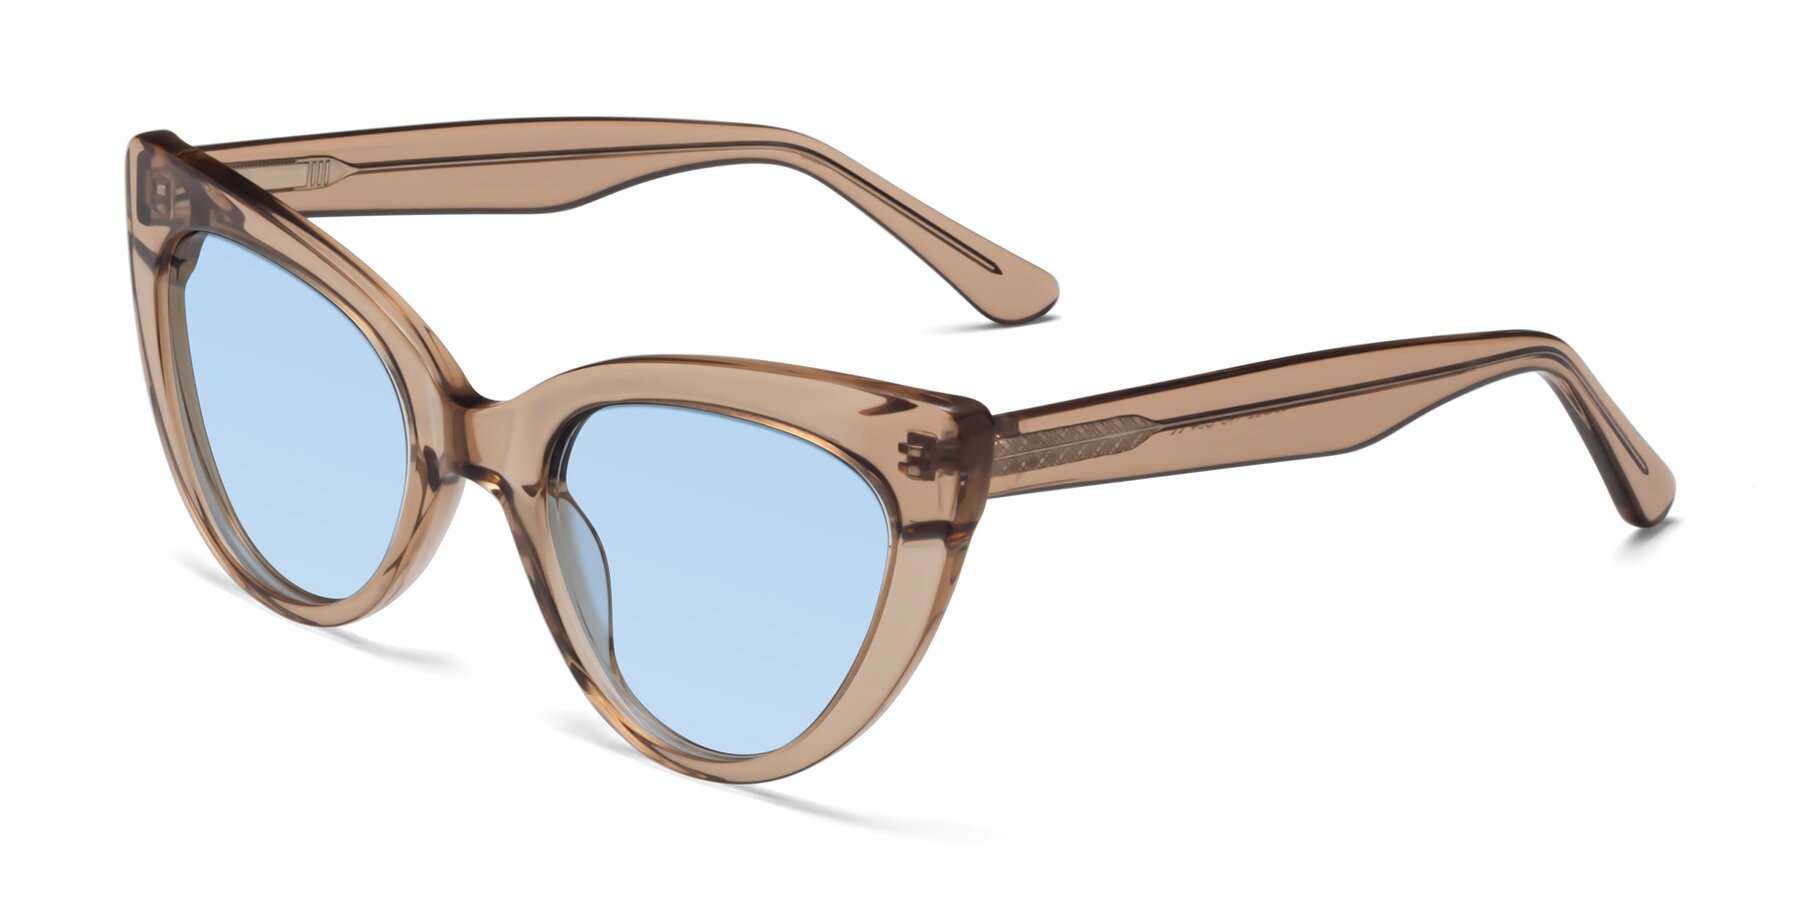 Angle of Tiesi in Caramel with Light Blue Tinted Lenses